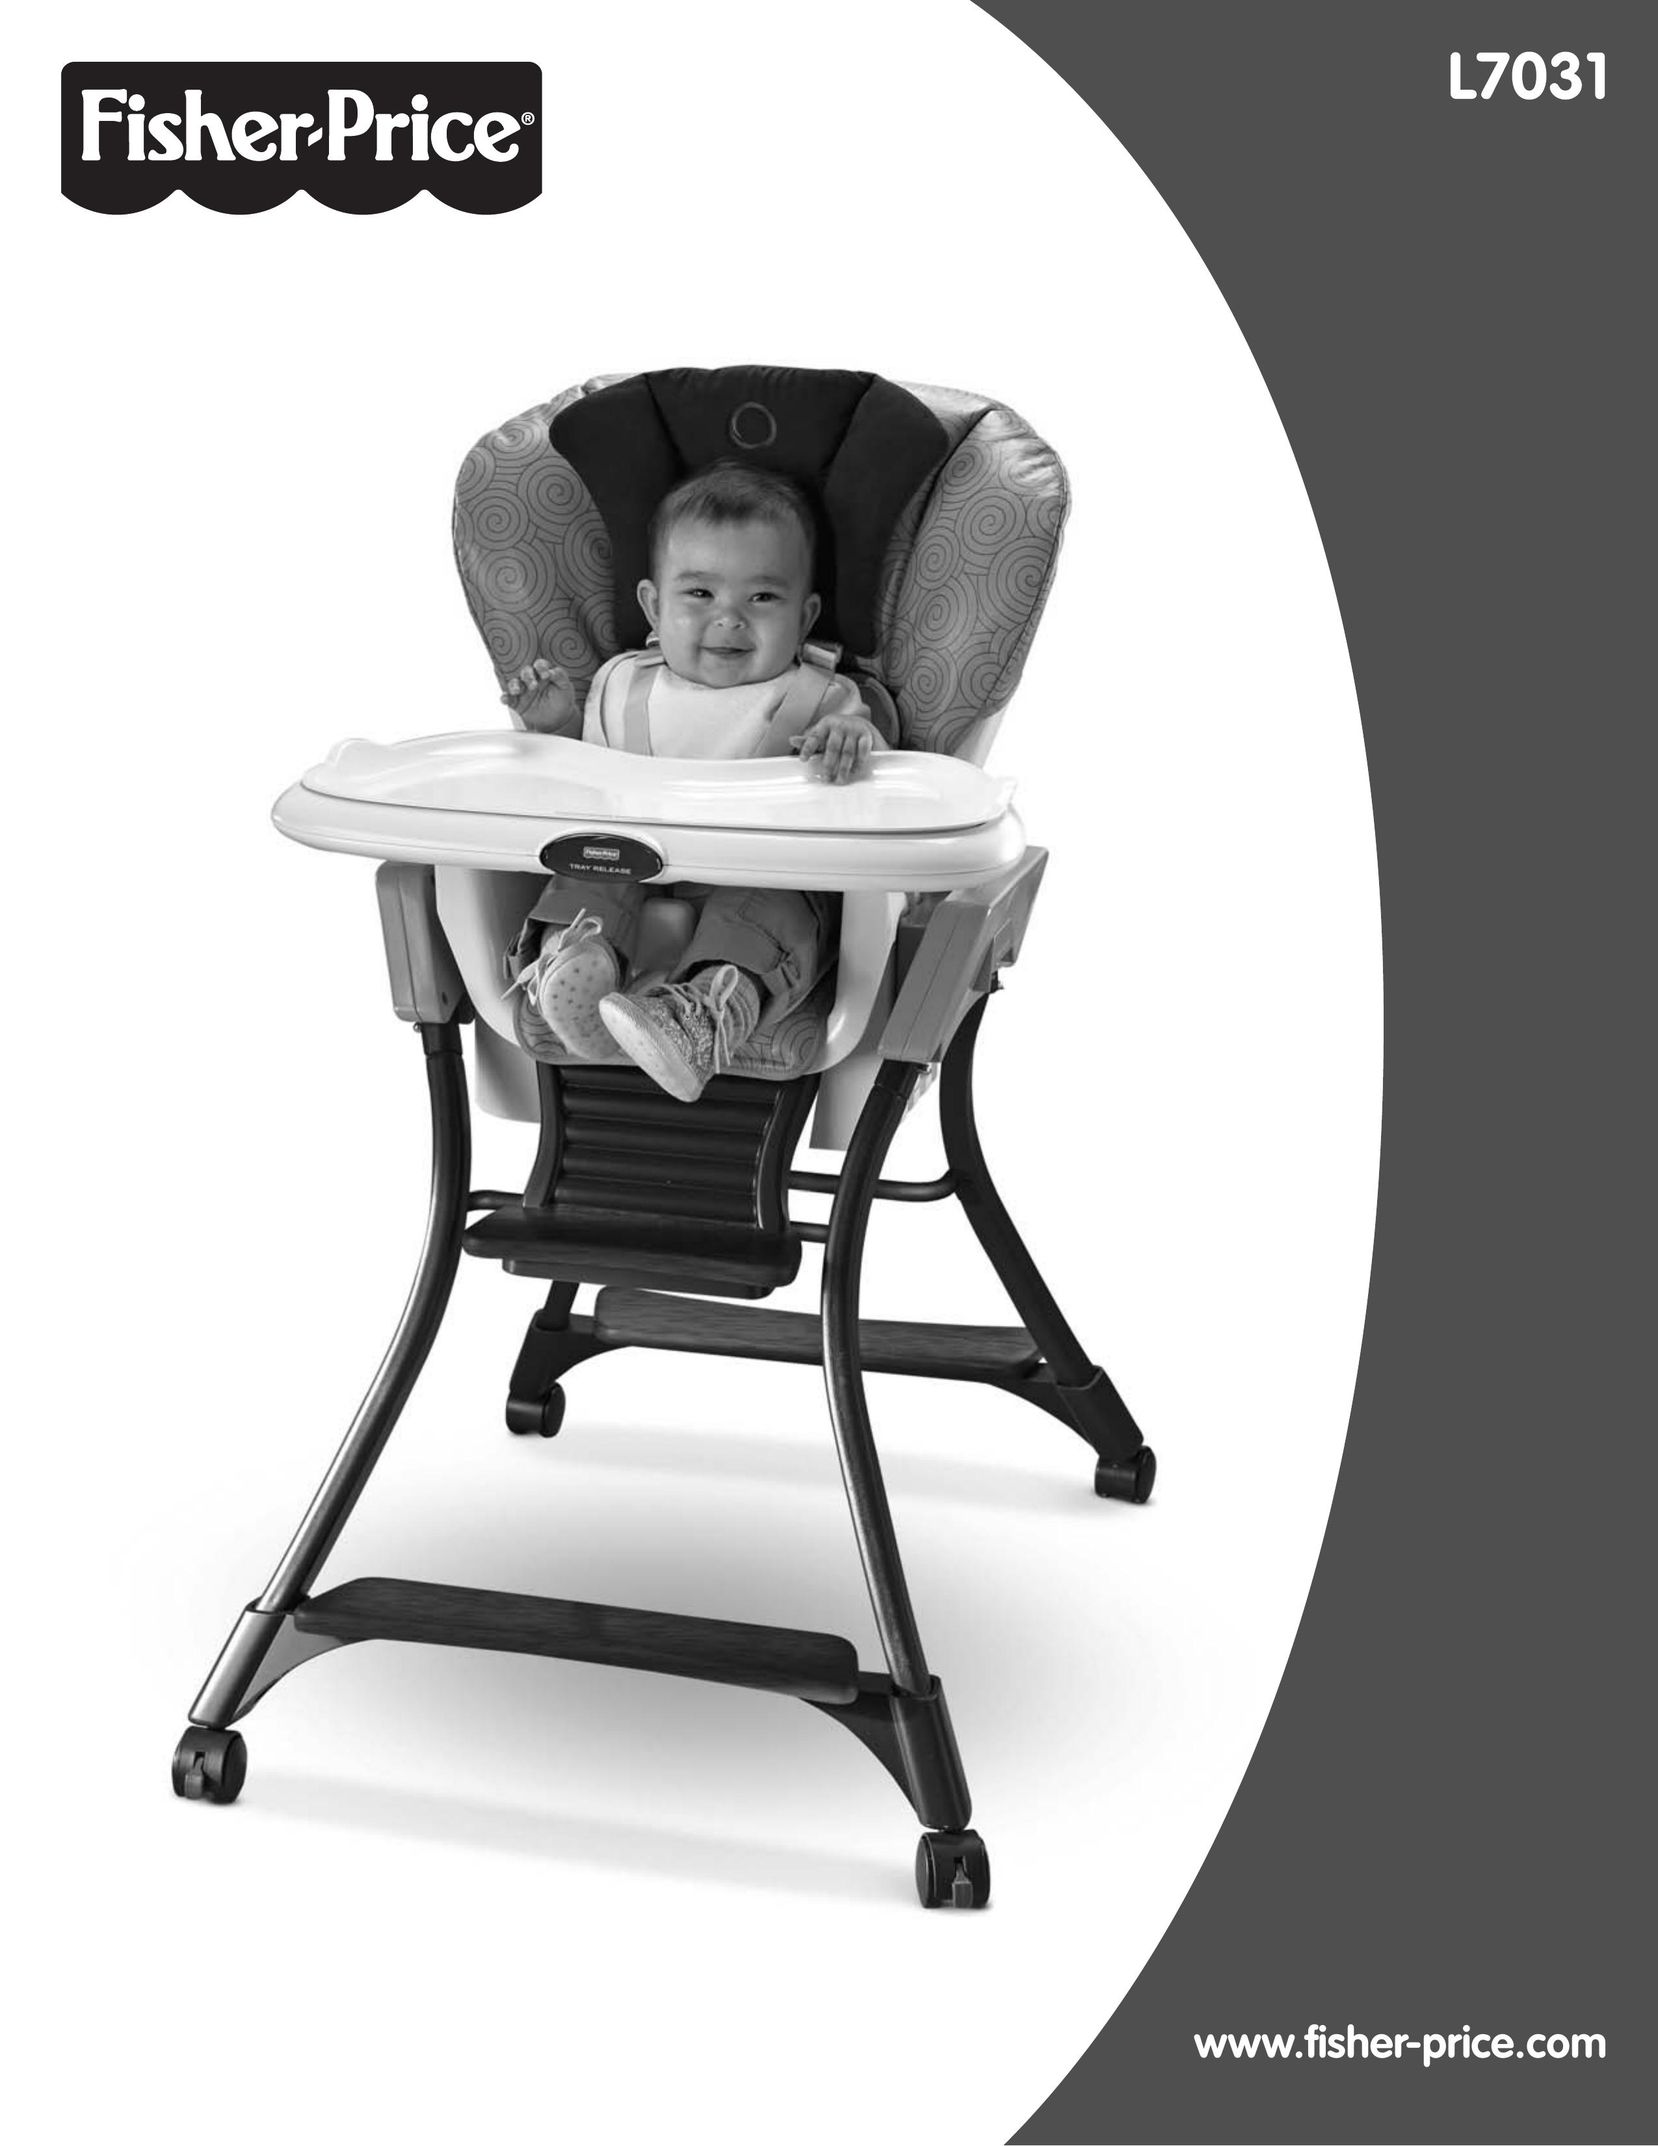 Fisher-Price L7031 High Chair User Manual